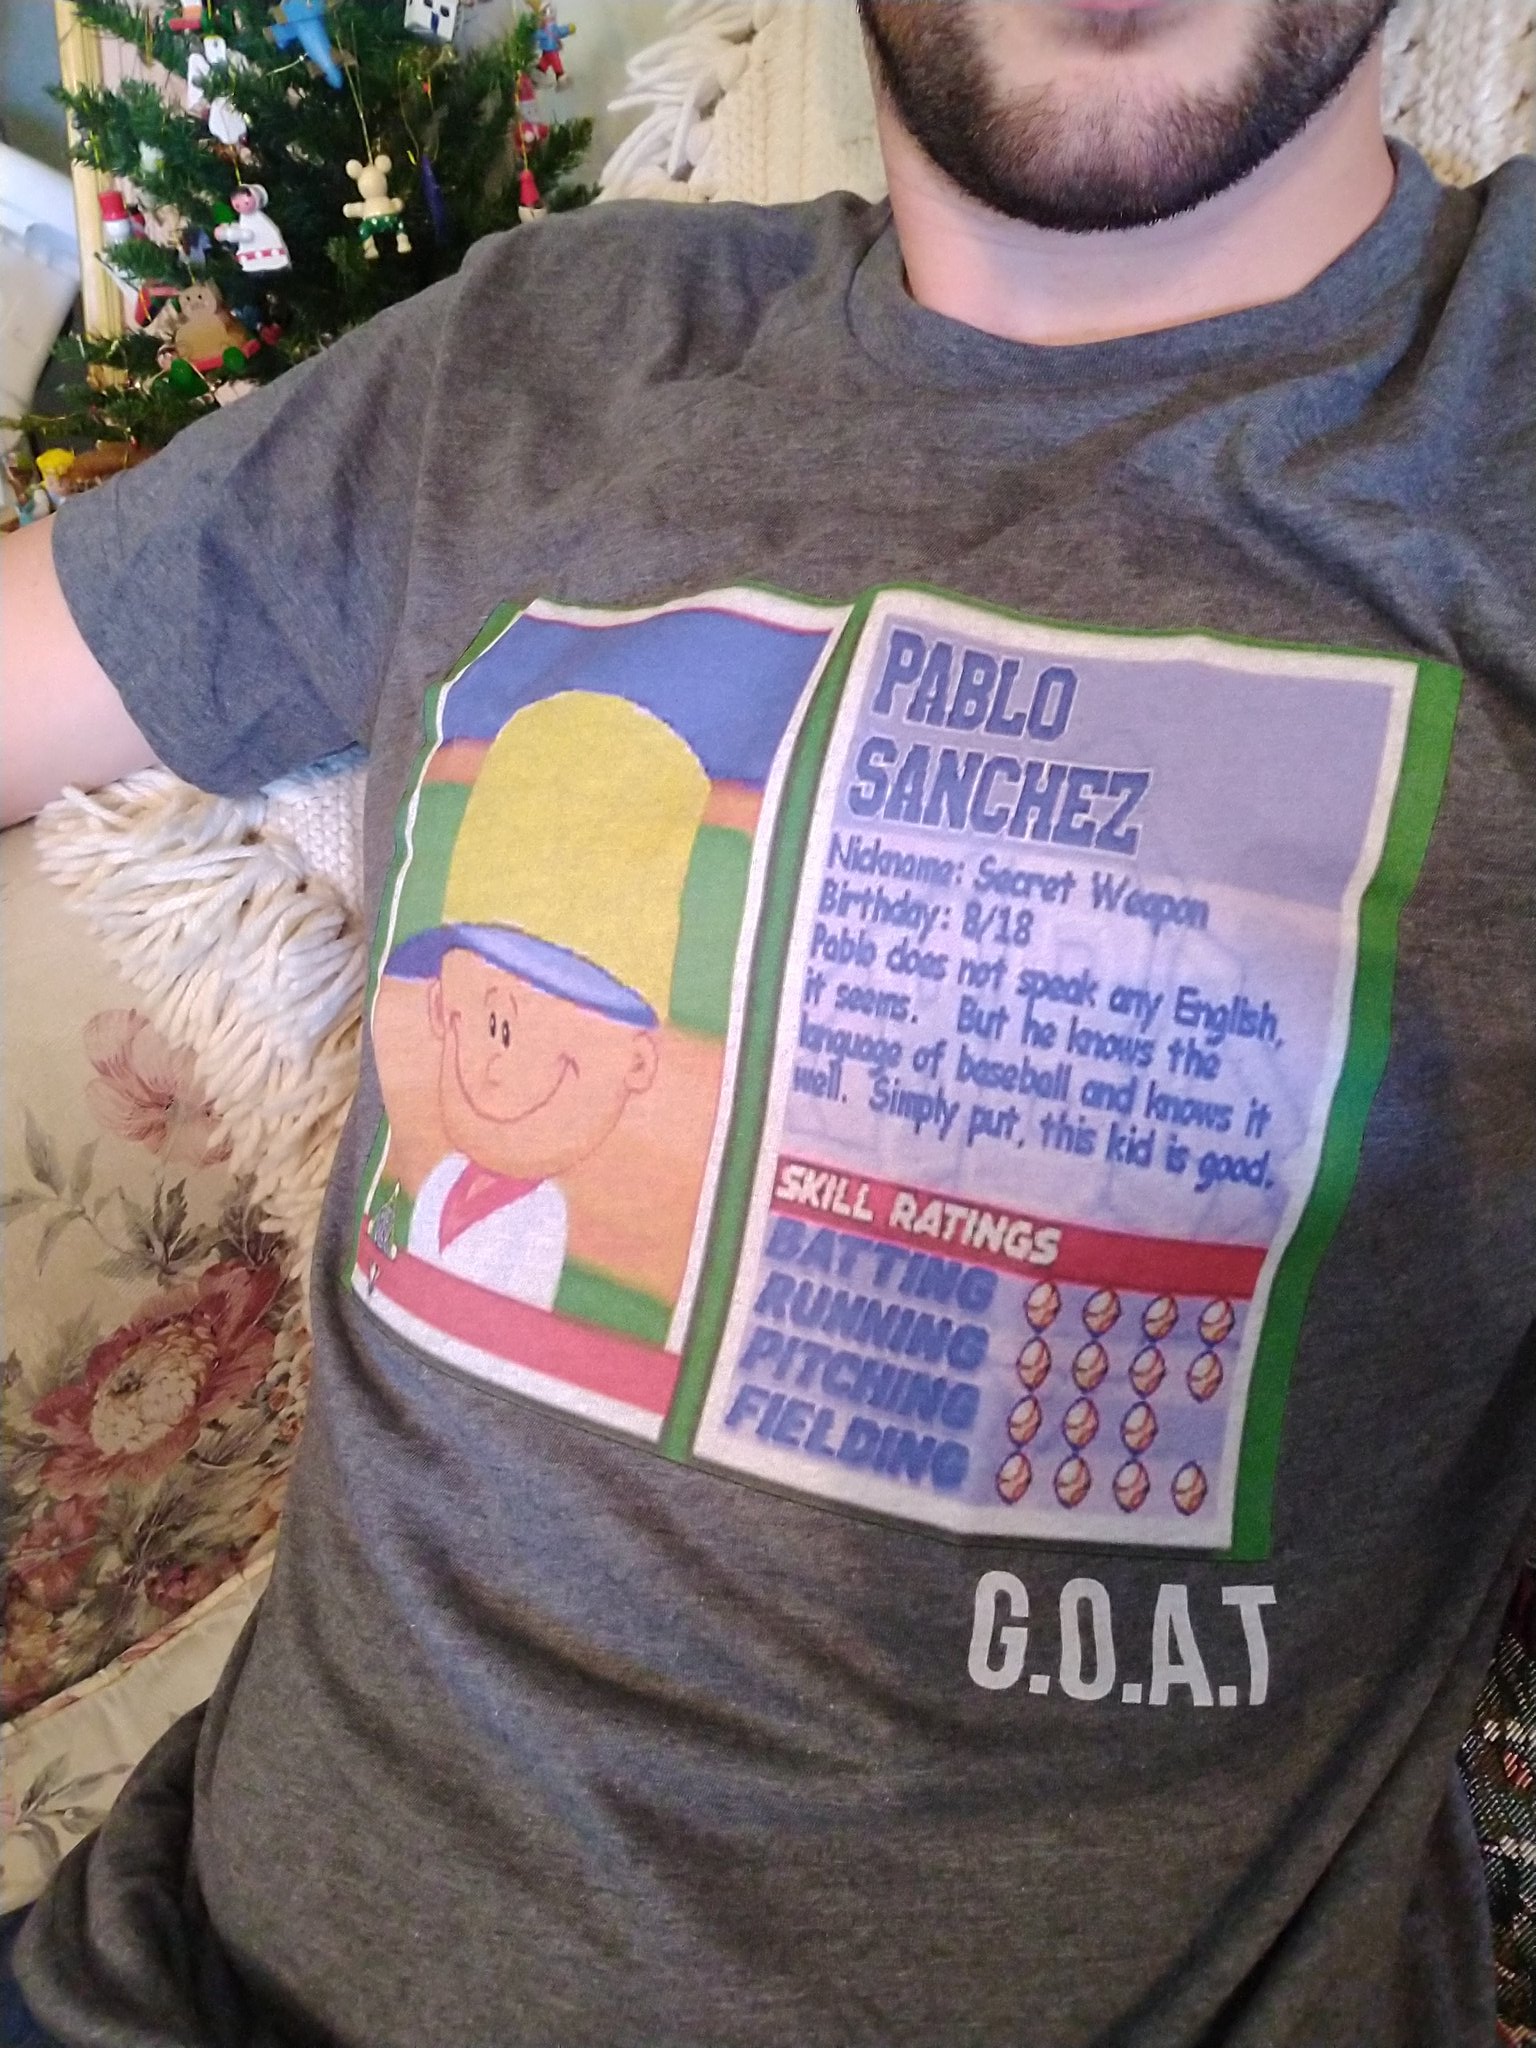 Man wearing a shirt describing the statistics of Pablo Sanchez from a video game, followed by the inscription 'G.O.A.T.'